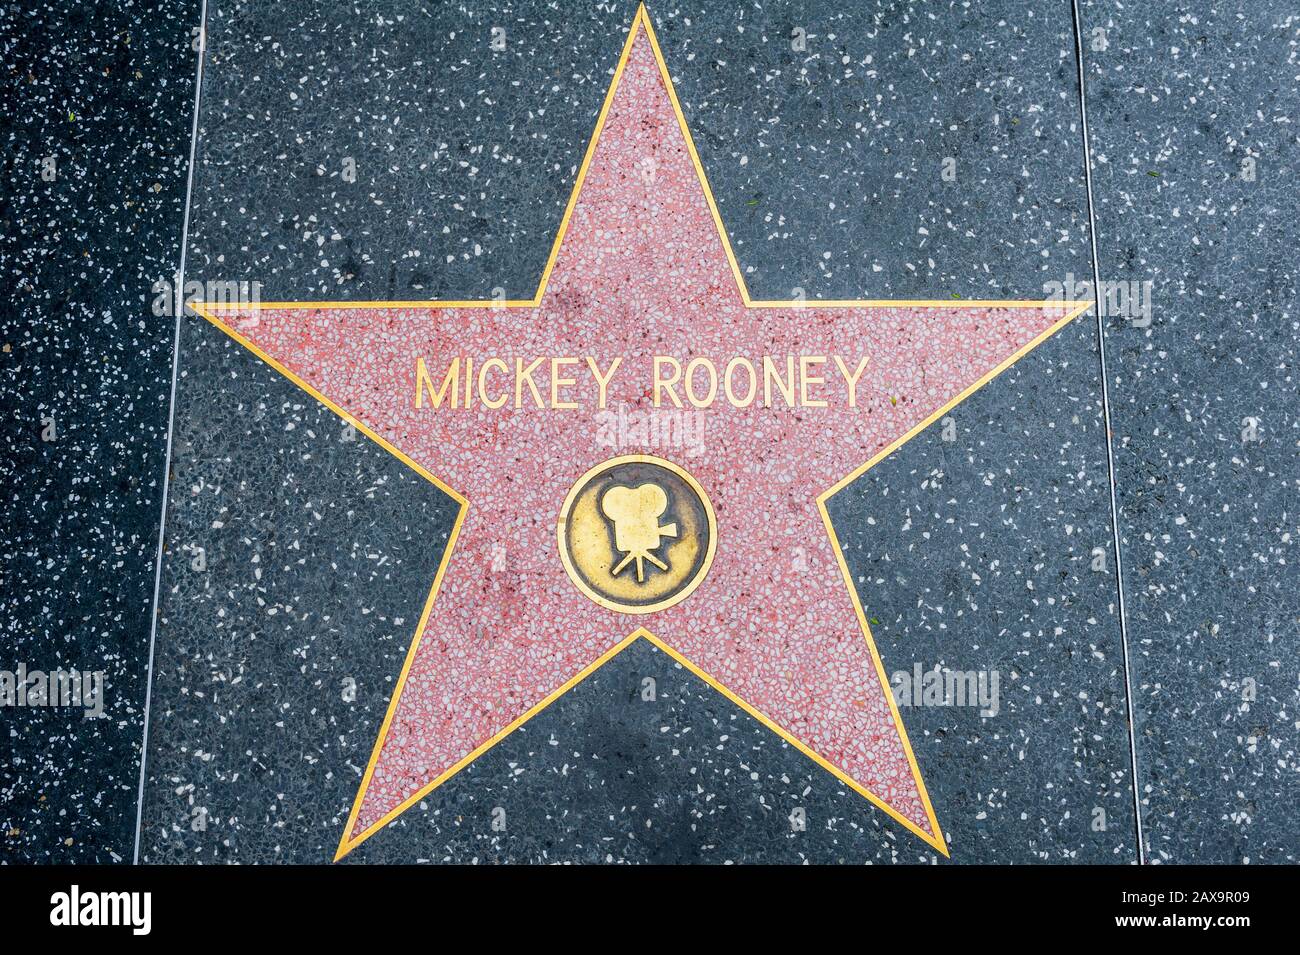 Mickey Rooney star on Hollywood Walk of Fame in Hollywood, California. Mickey Rooney was an American actor and comedian, active from 1922-2014. Stock Photo